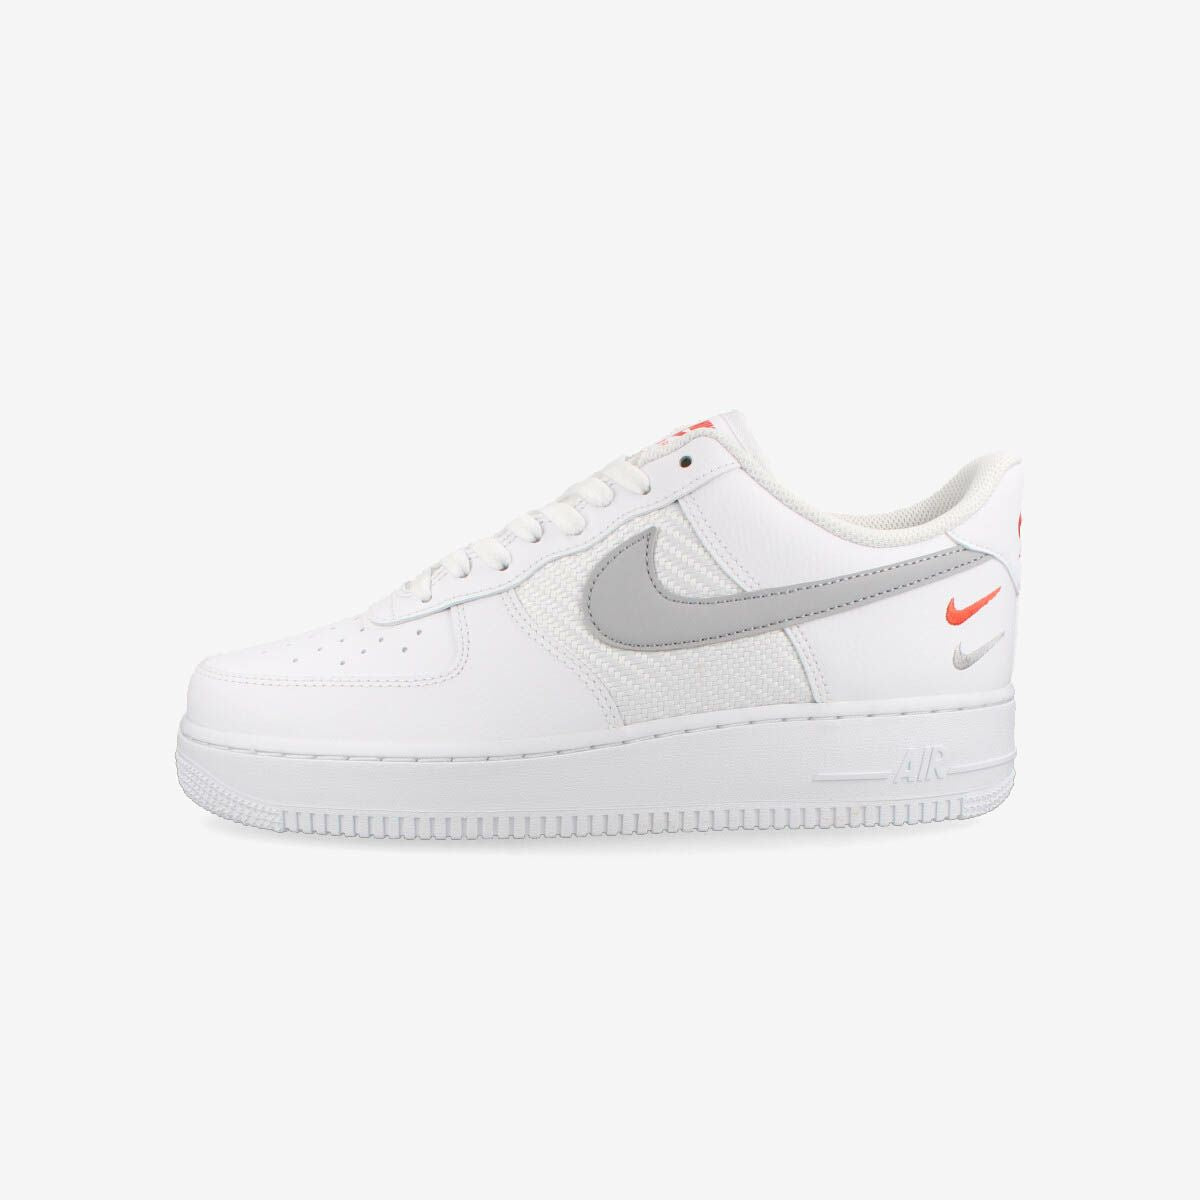 Nike Air Force 1 '07 Low 'White Picante Red' FD0654-100 - KICKS CREW